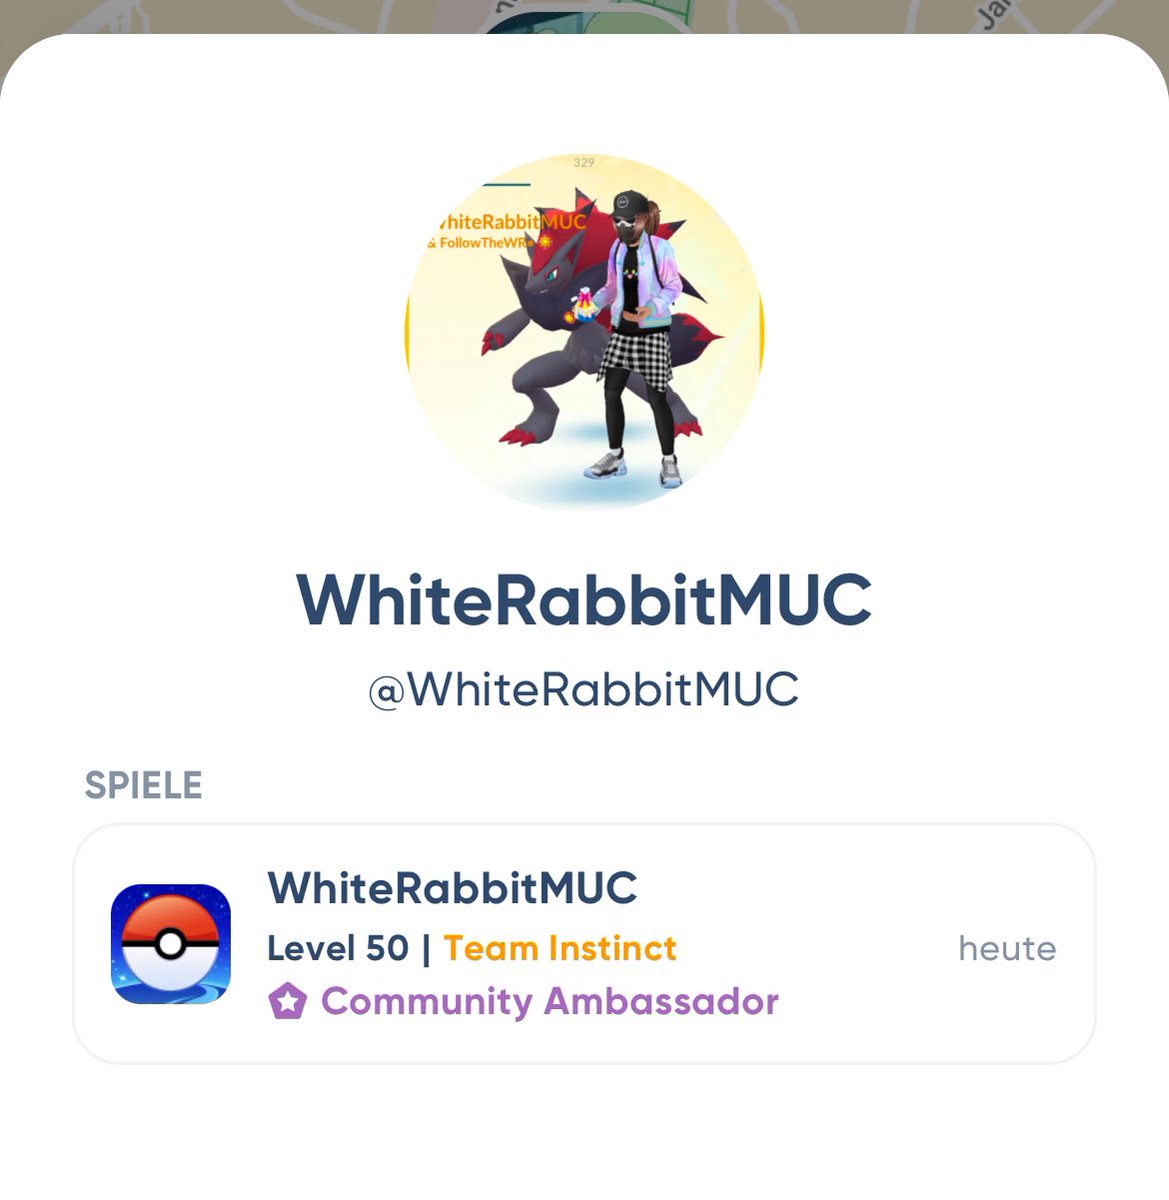 👉 I can hereby finally make it official: 
I am a @PokemonGoApp Community Ambassador for my local Pokémon GO group in München / Munich! ✨
I am very humble & happy @NianticLabs made this possible through their program! ❤️
THANK YOU 💐
Now, let this journey begin! 🐰 #PokémonGO 👇